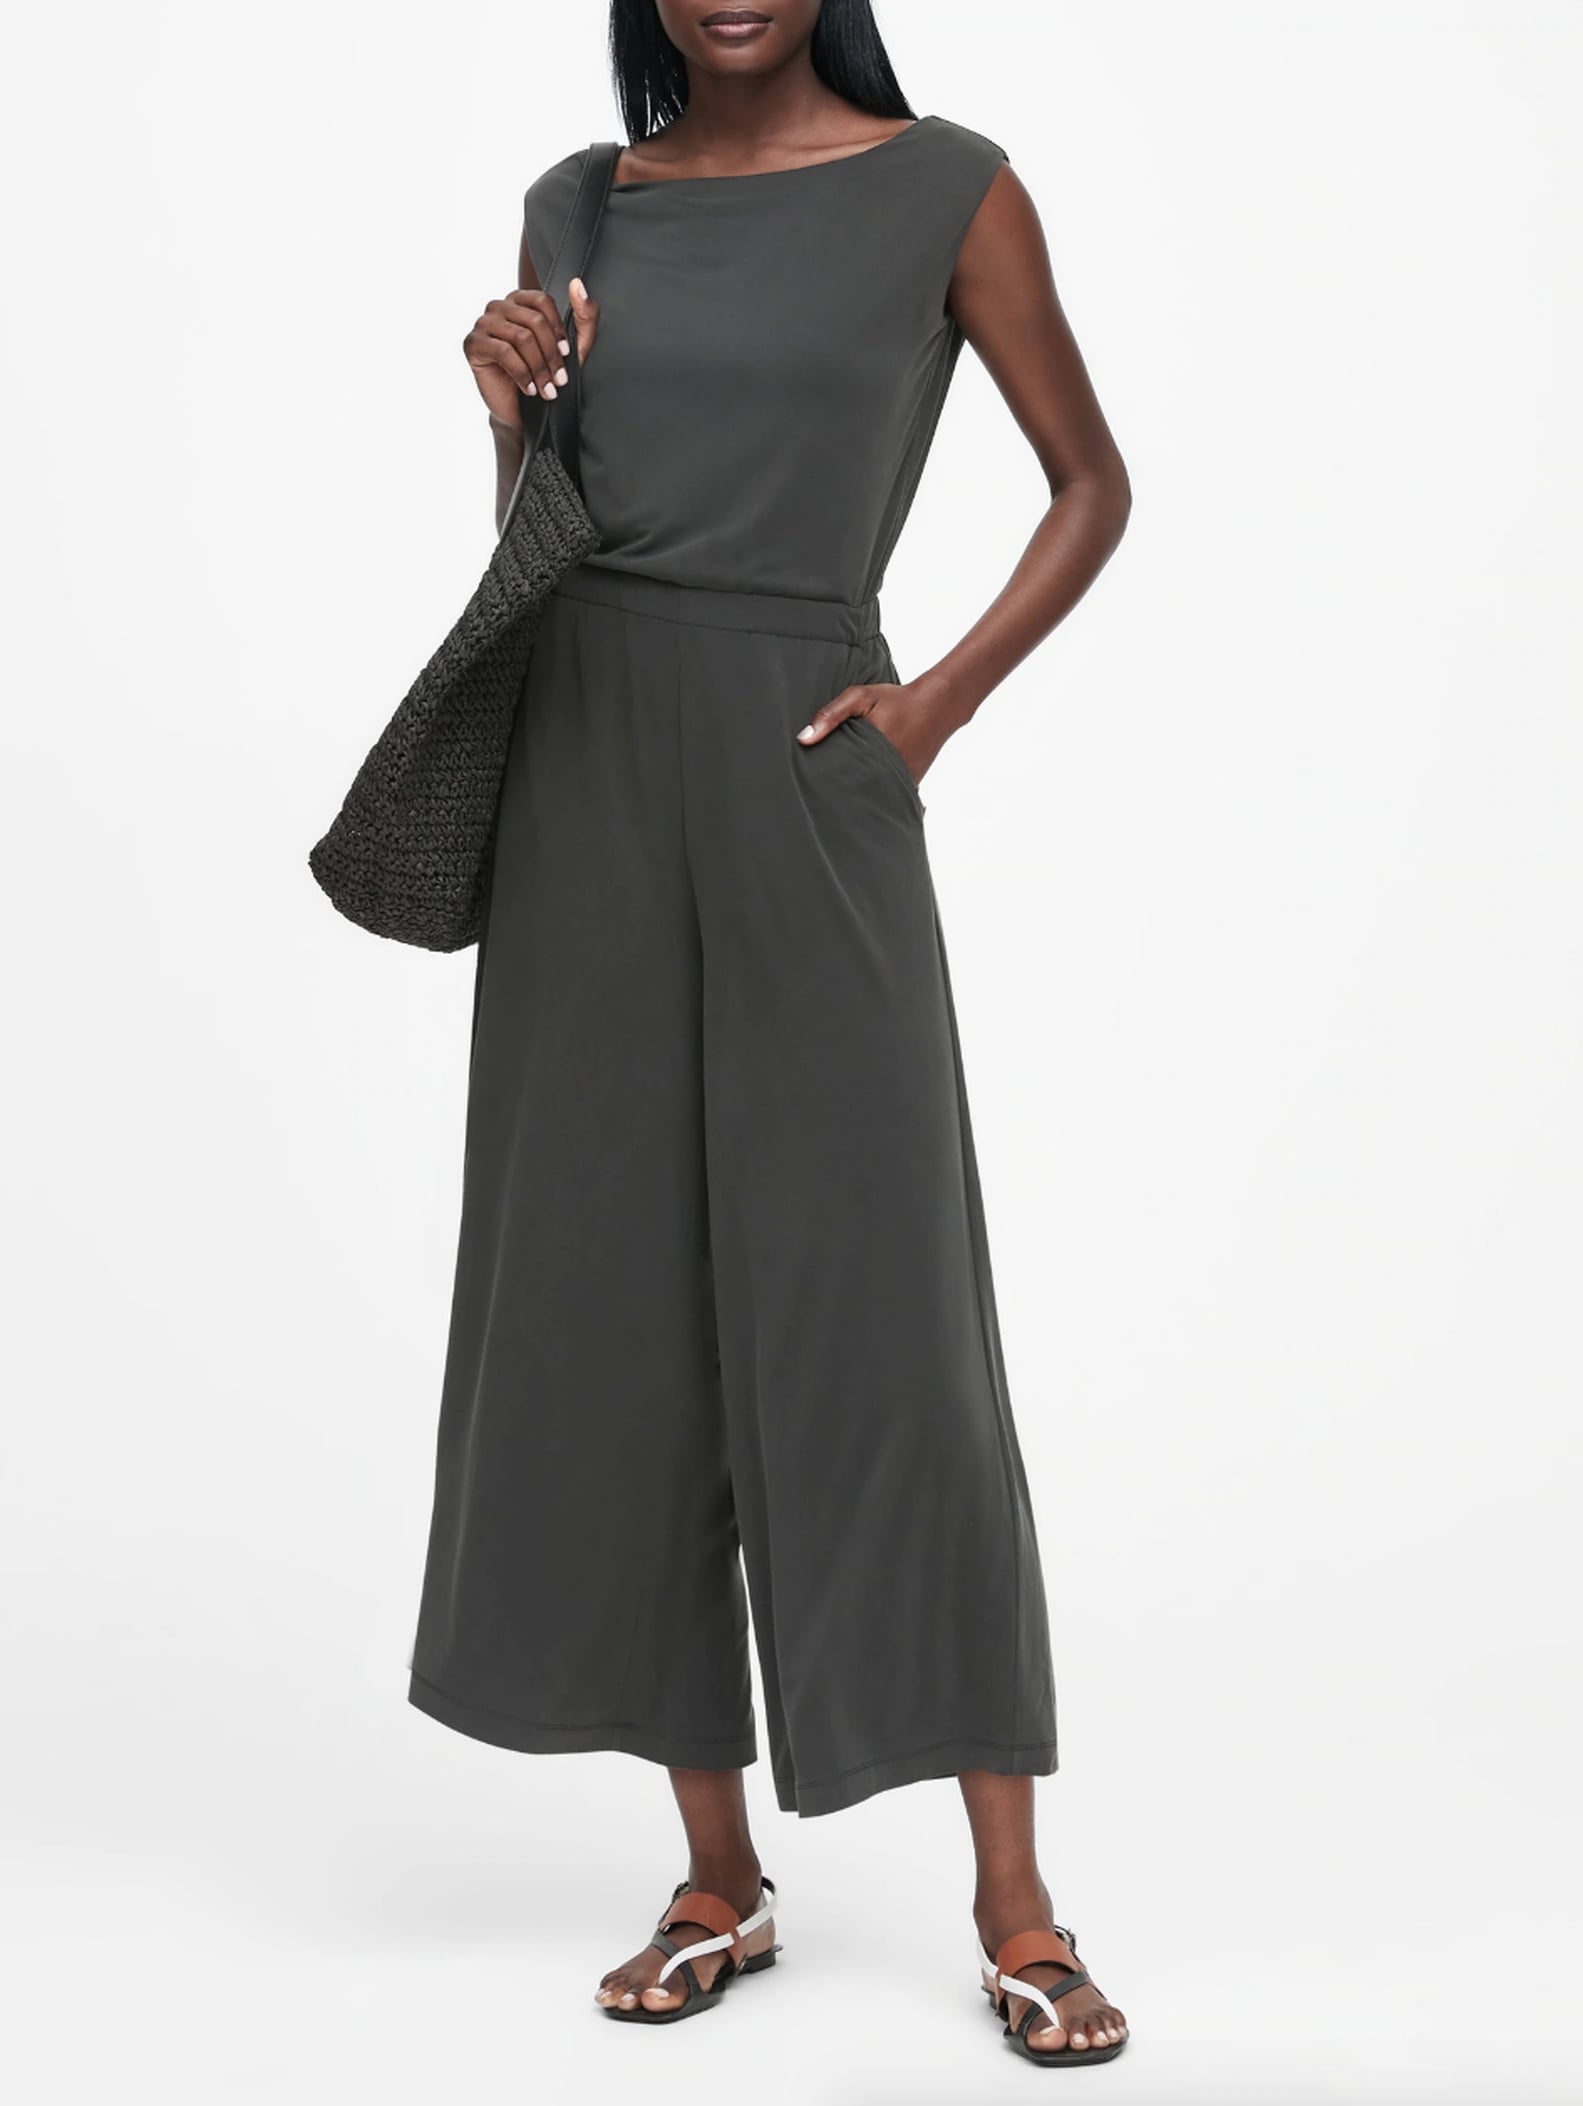 Summer Work Outfits From Banana Republic | POPSUGAR Fashion